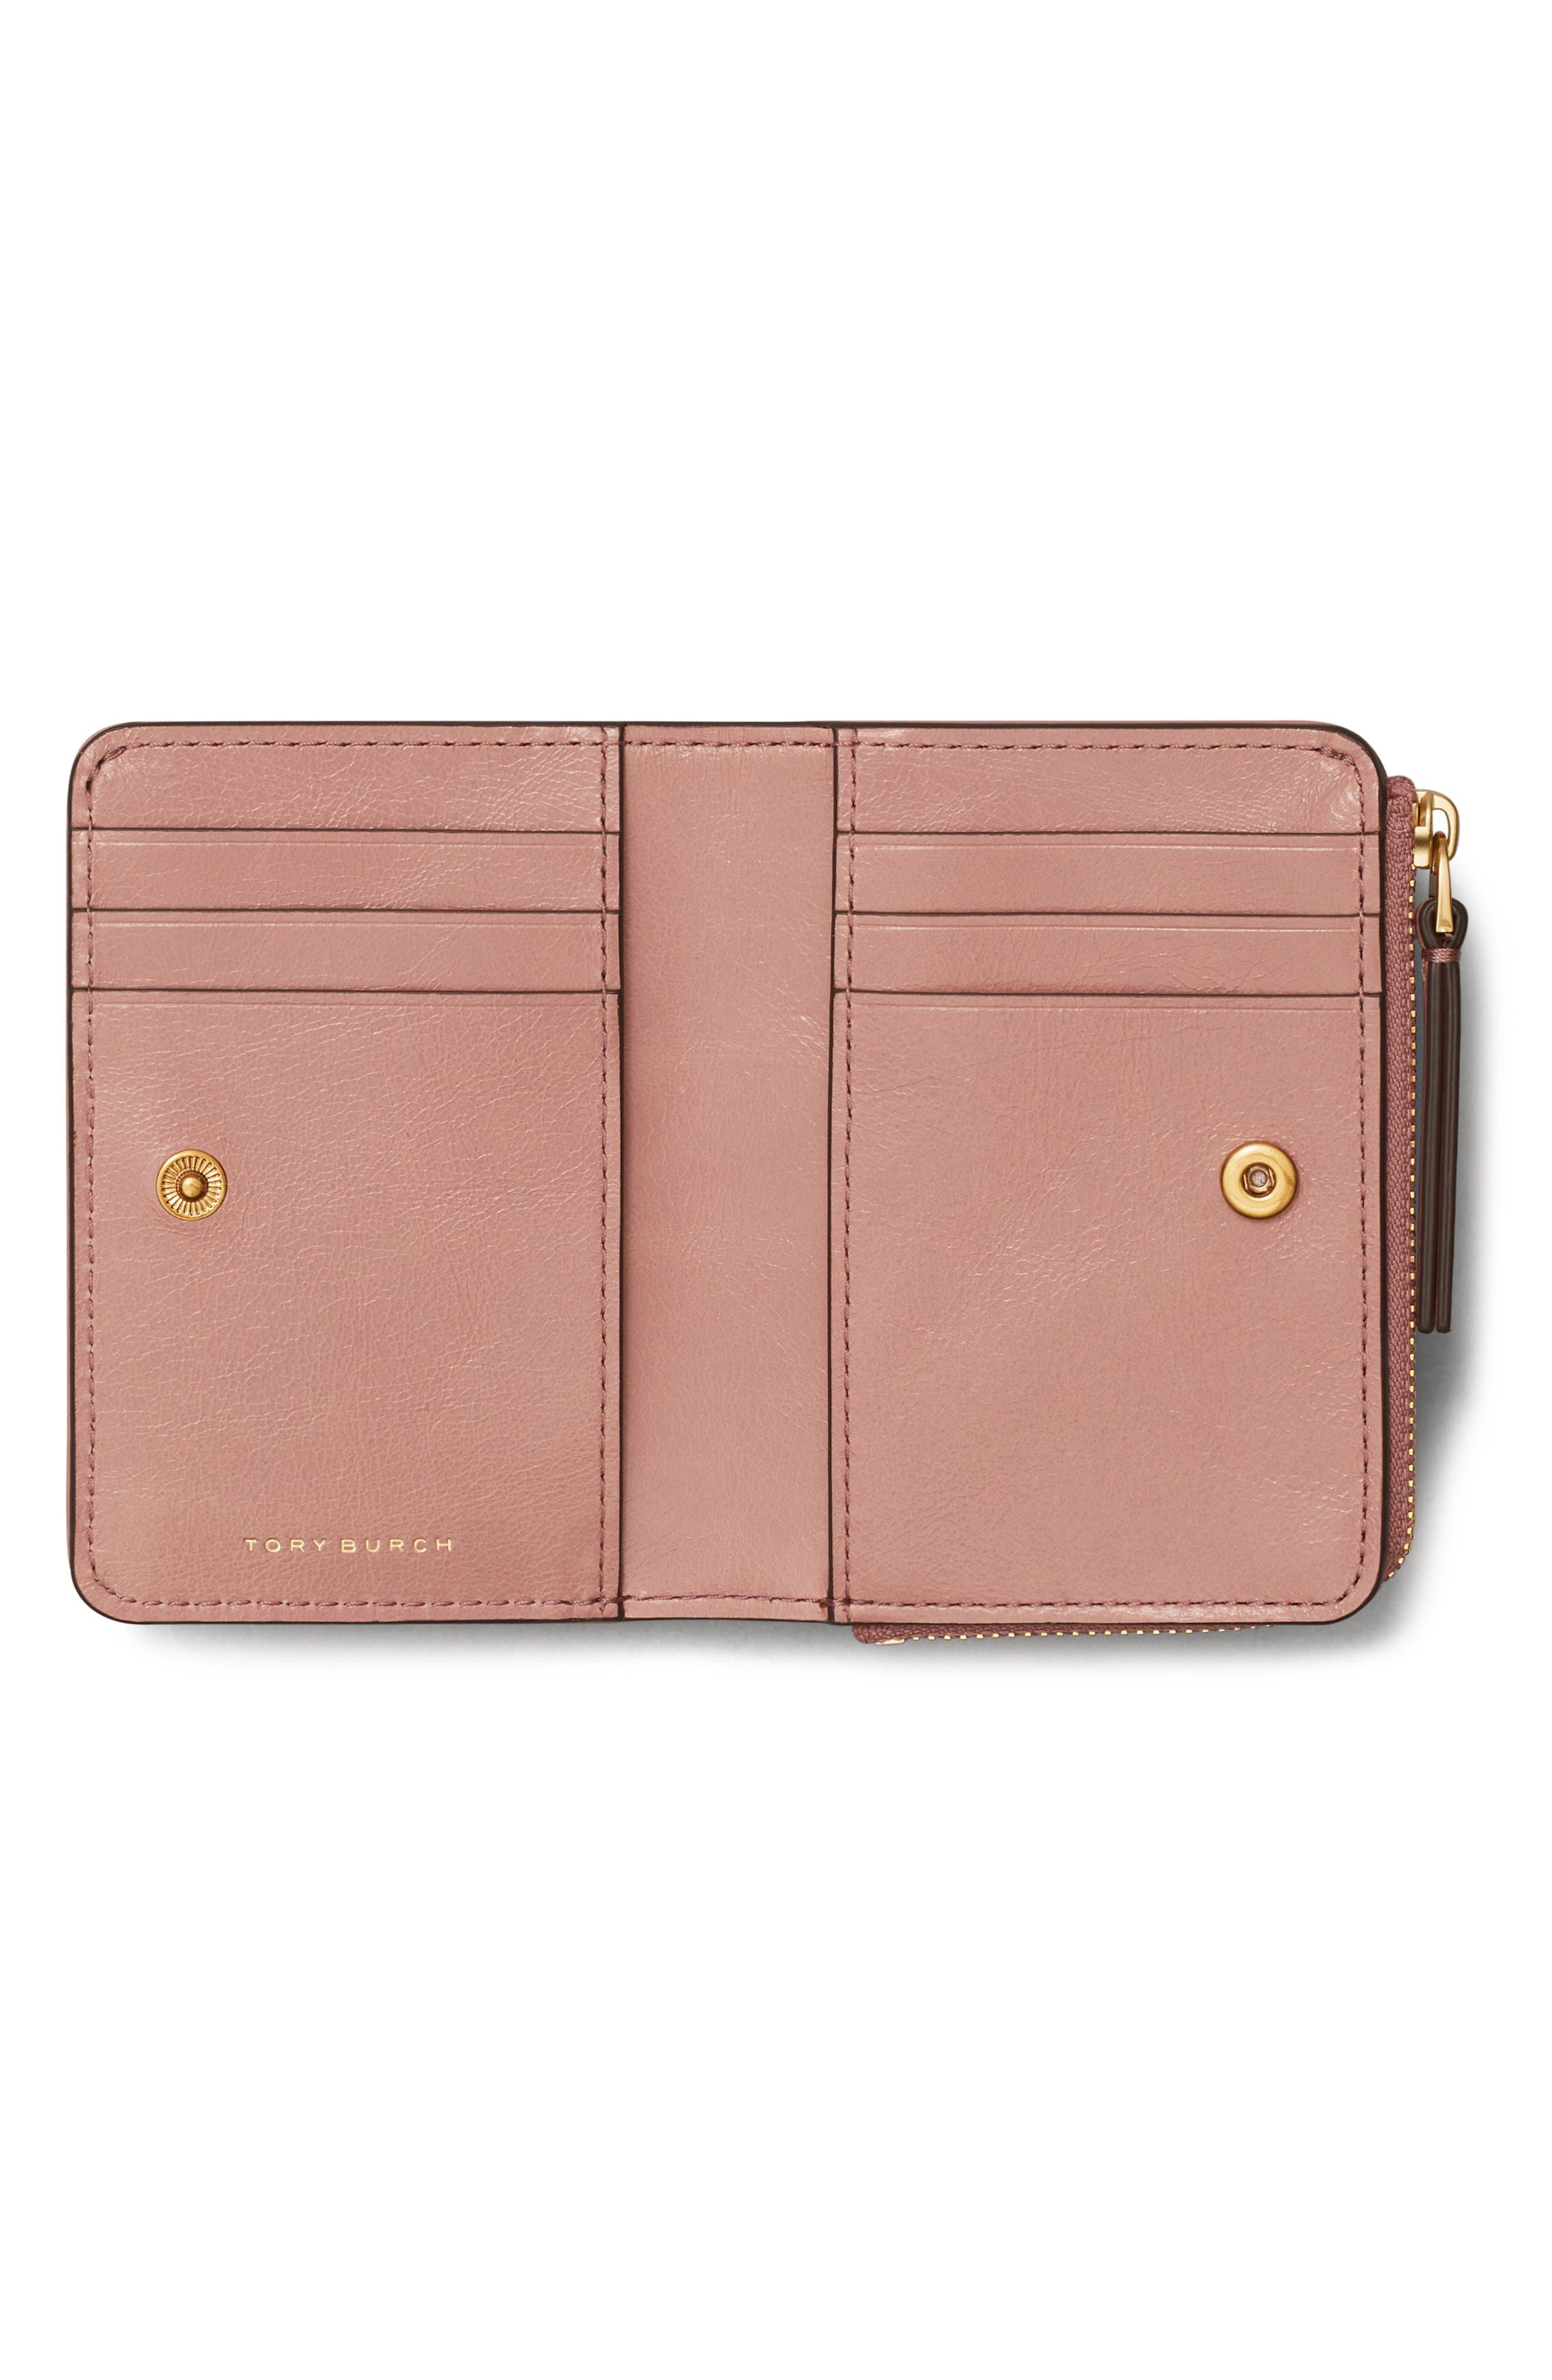 Tory Burch Kira Moto Quilted Wallet on A Chain in Pink Magnolia